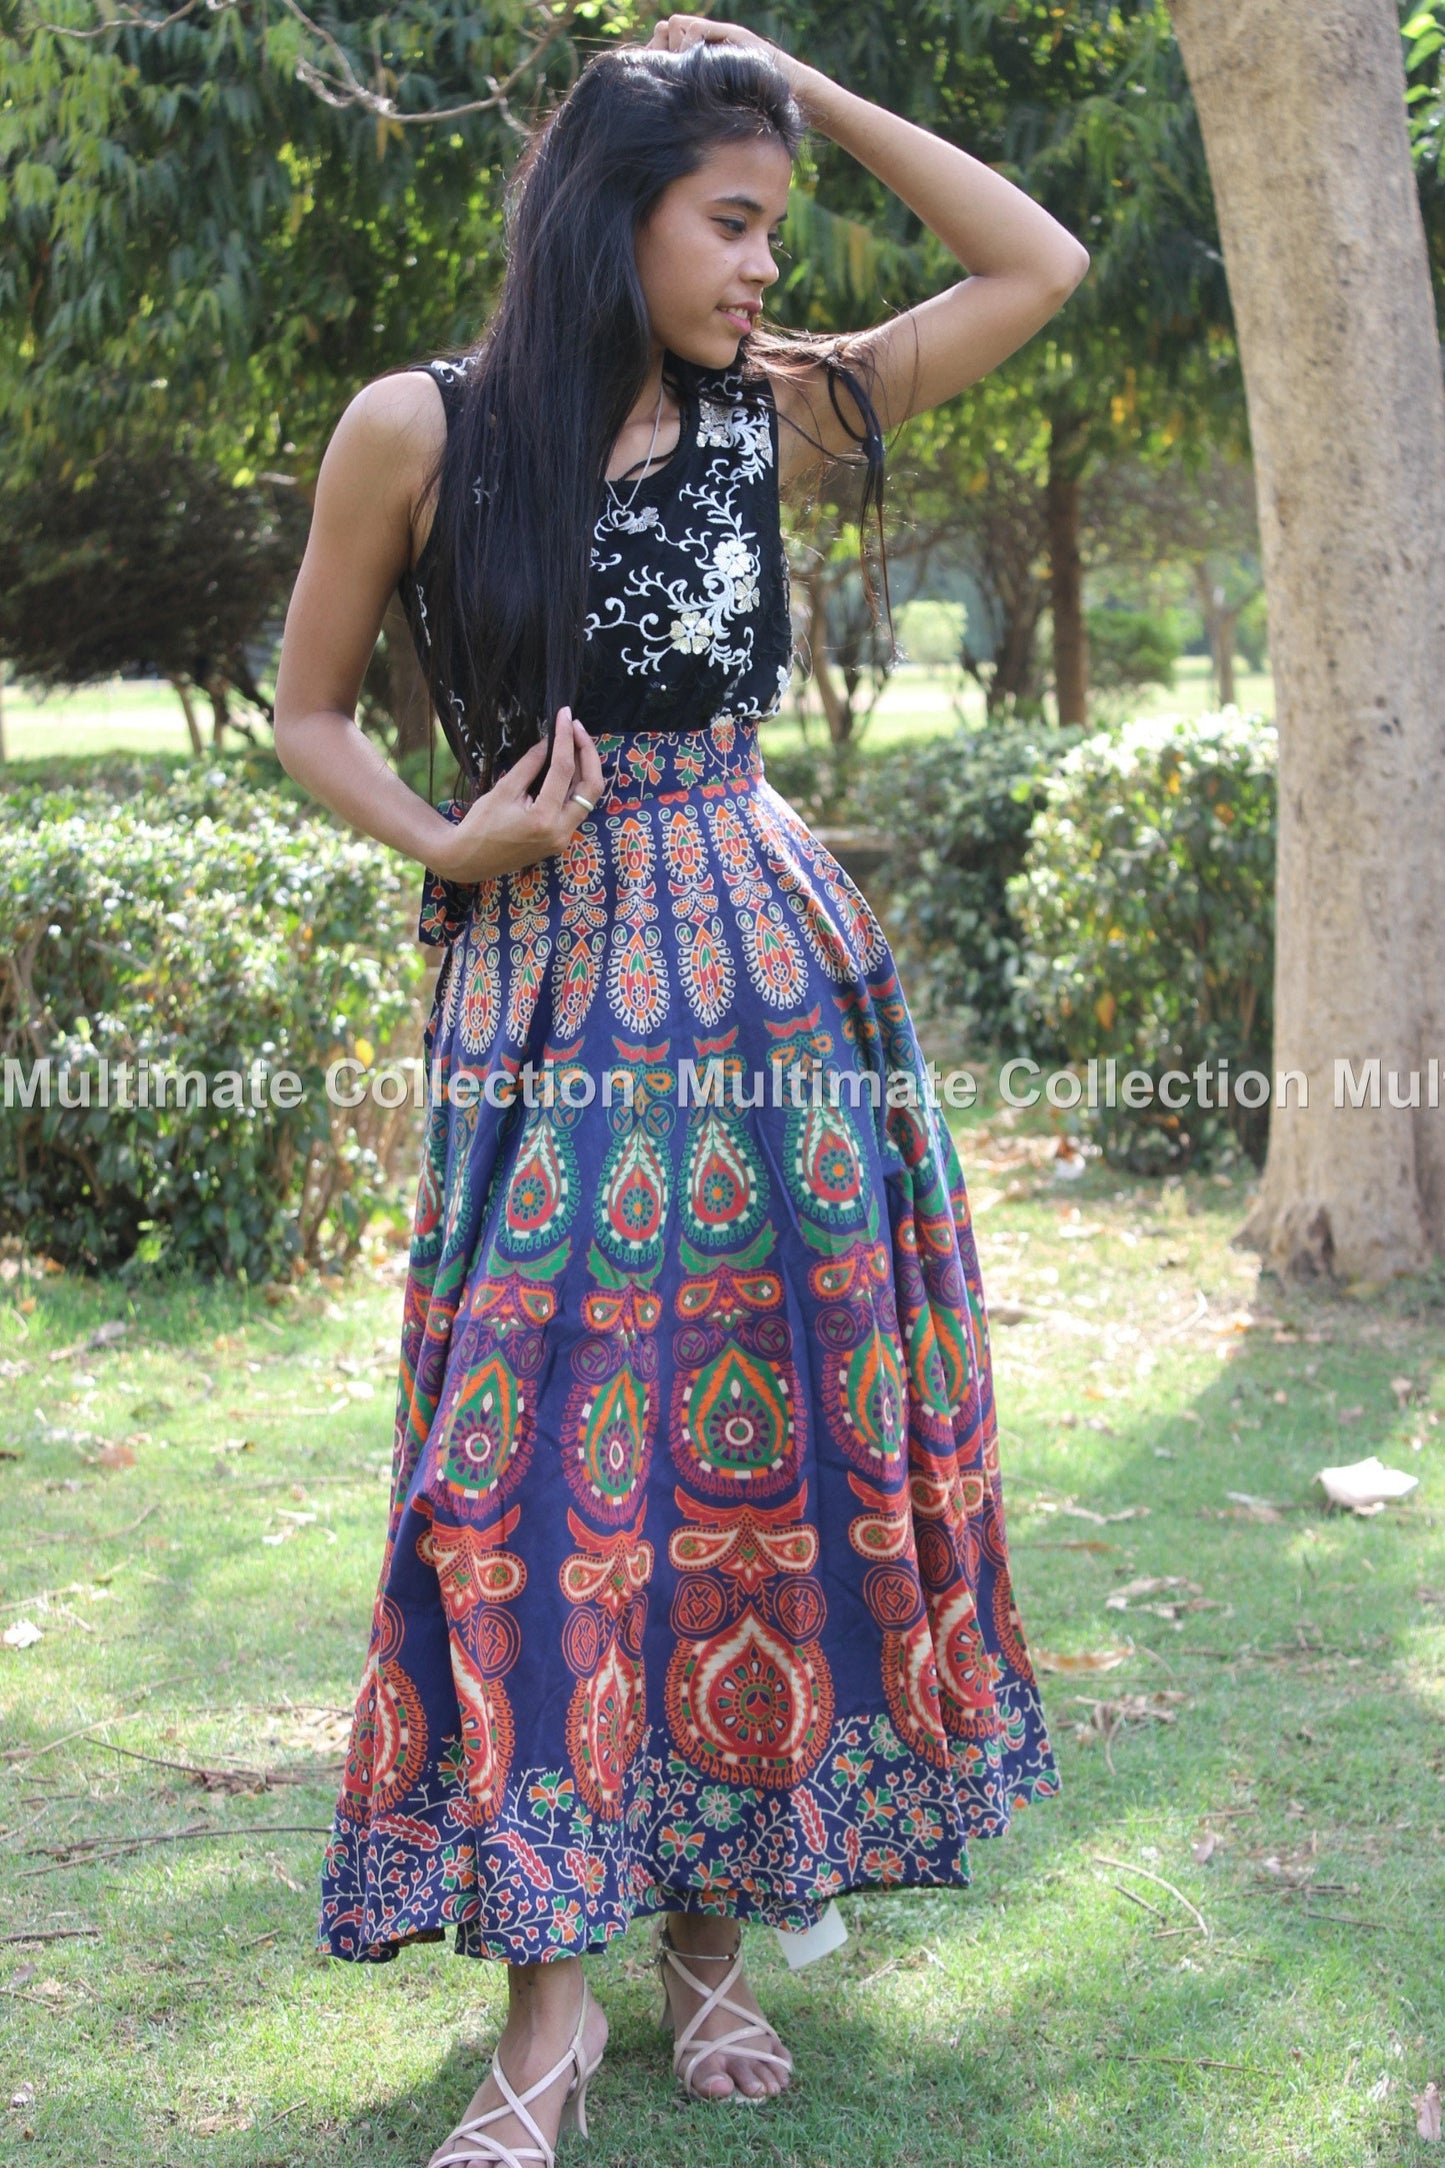 Bohemian Gypsy Skirt for Festival Season: Fairy-Inspired Clothing Skirt Perfect for a Hippie Home Outfit, Gypsy skirt